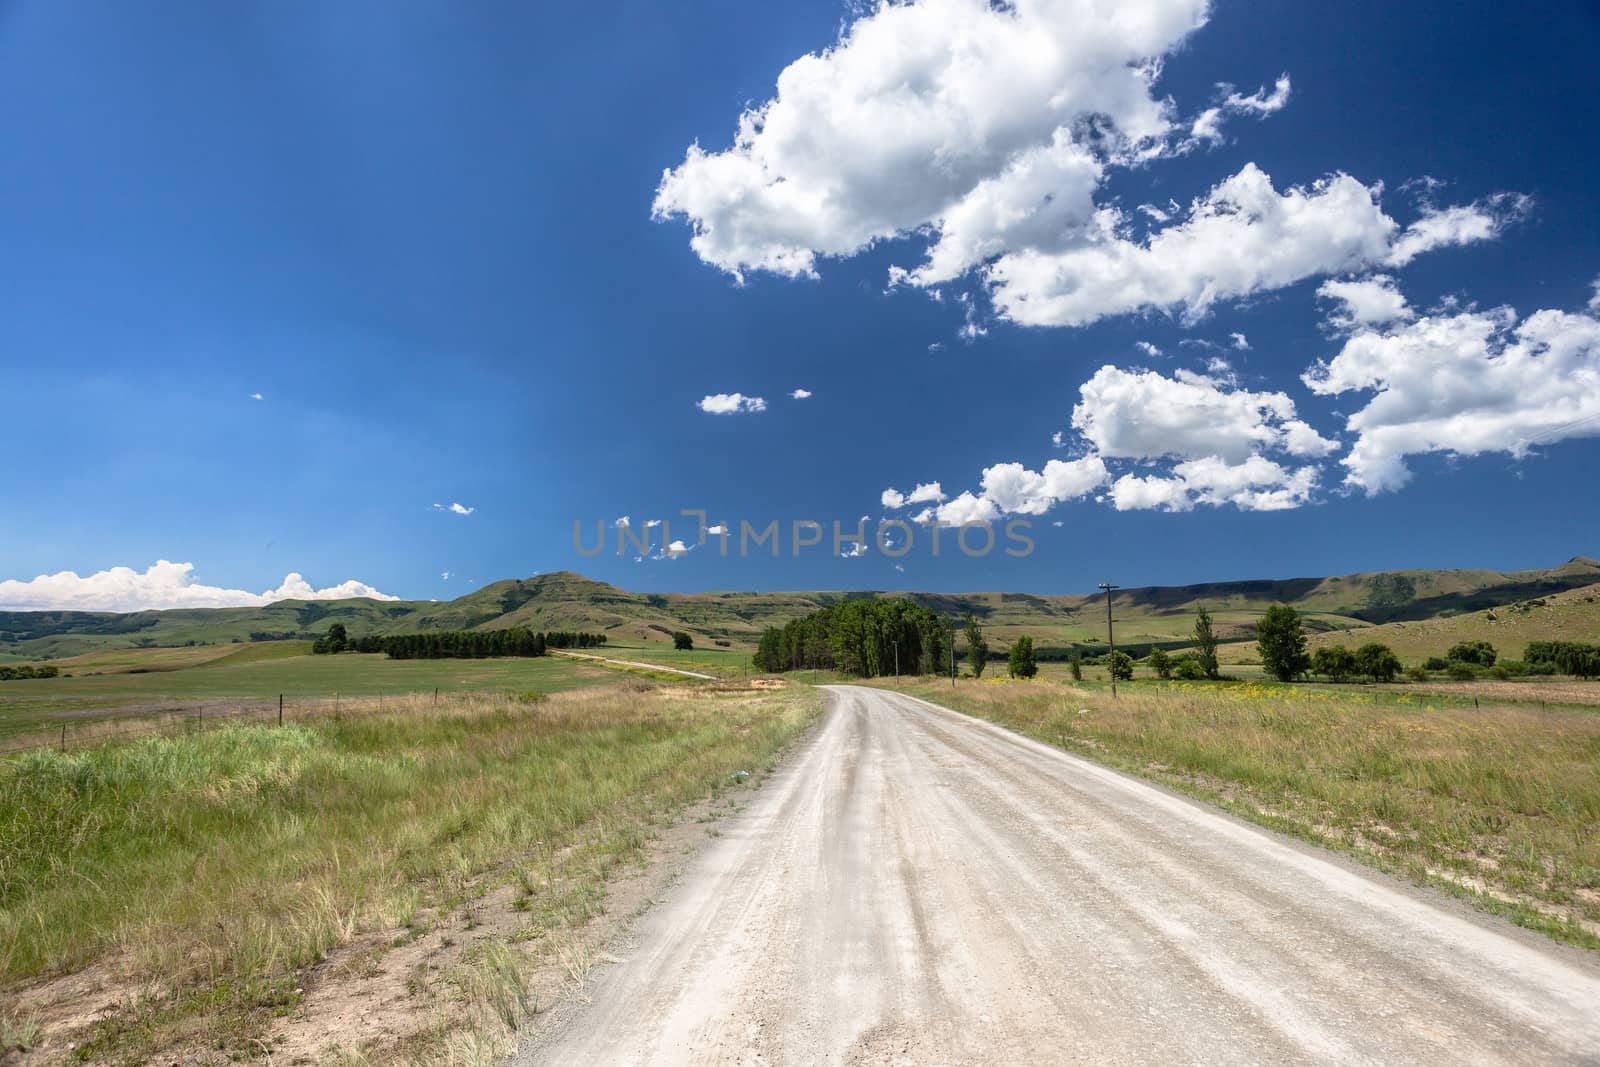 Summer mountain scenic landscape on dirt road through countryside with blue sky white cloud puffs.